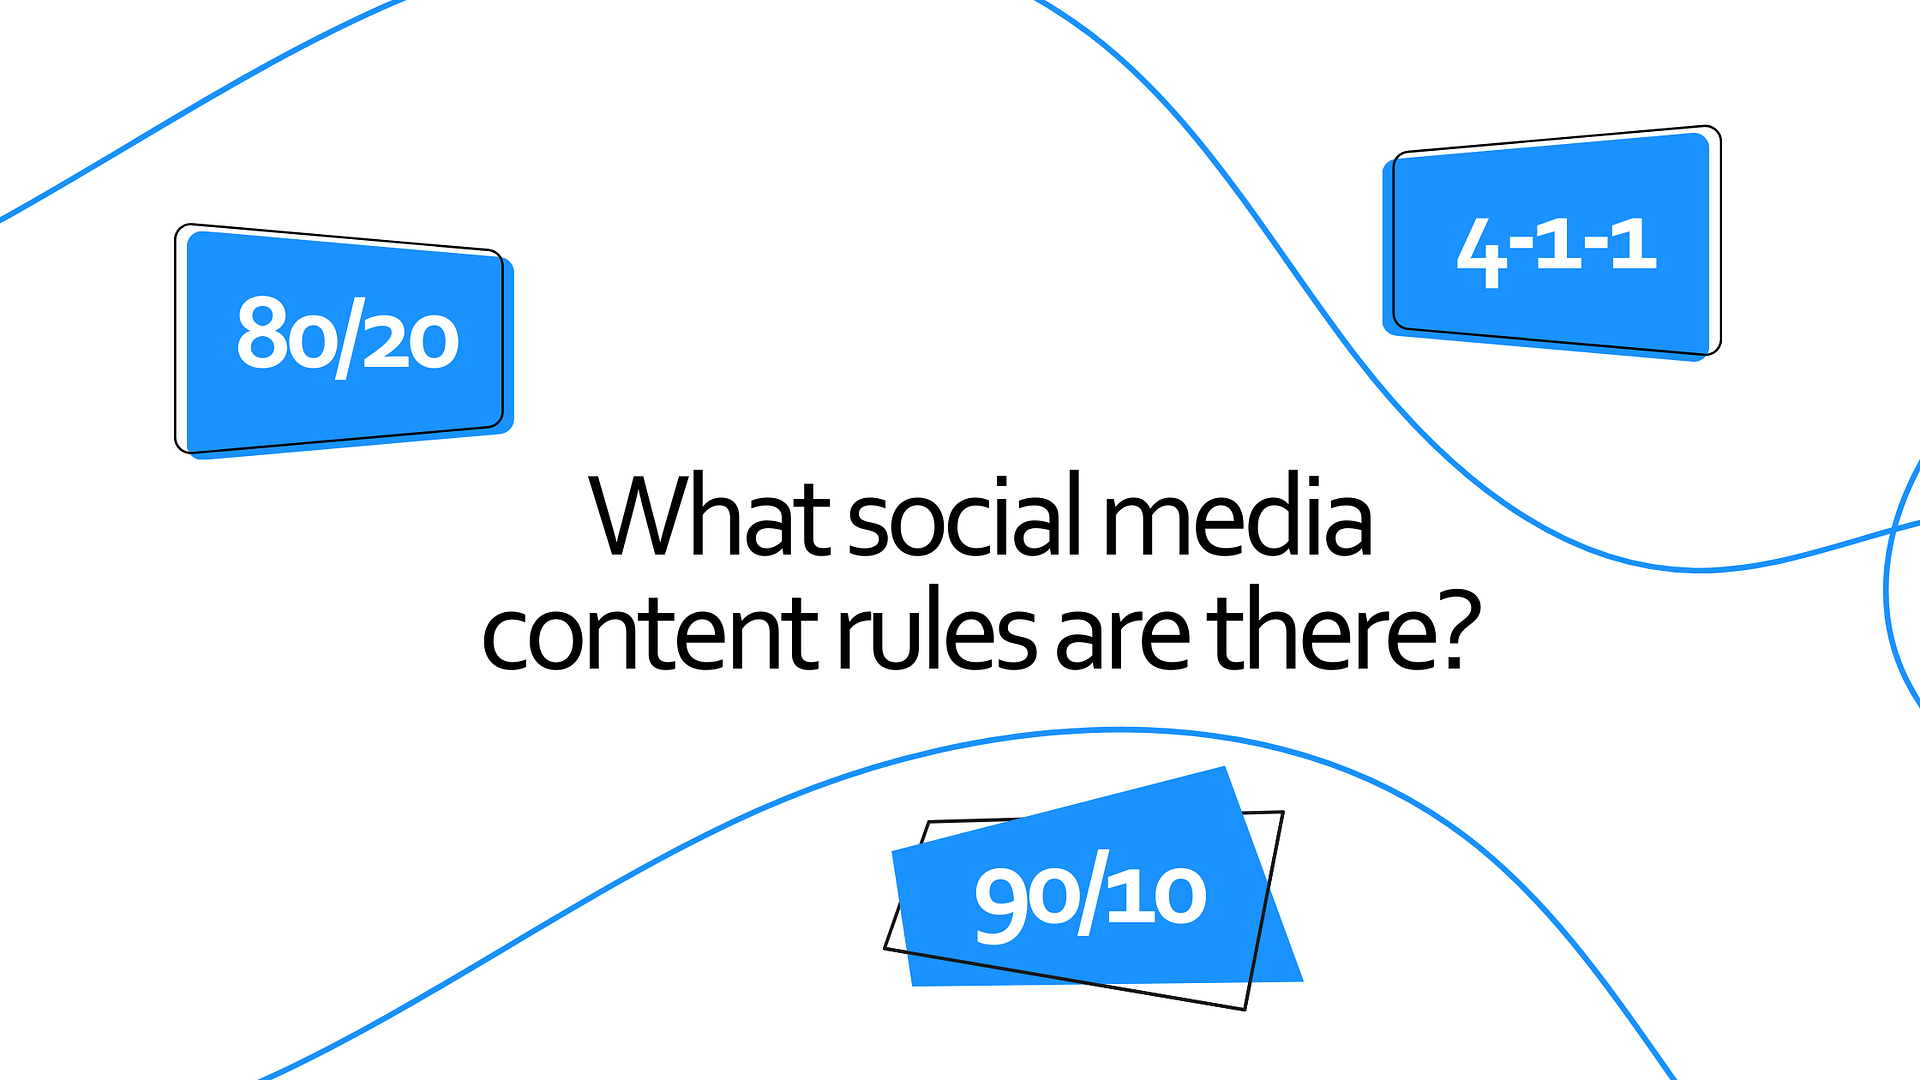 What social media content rules are there?